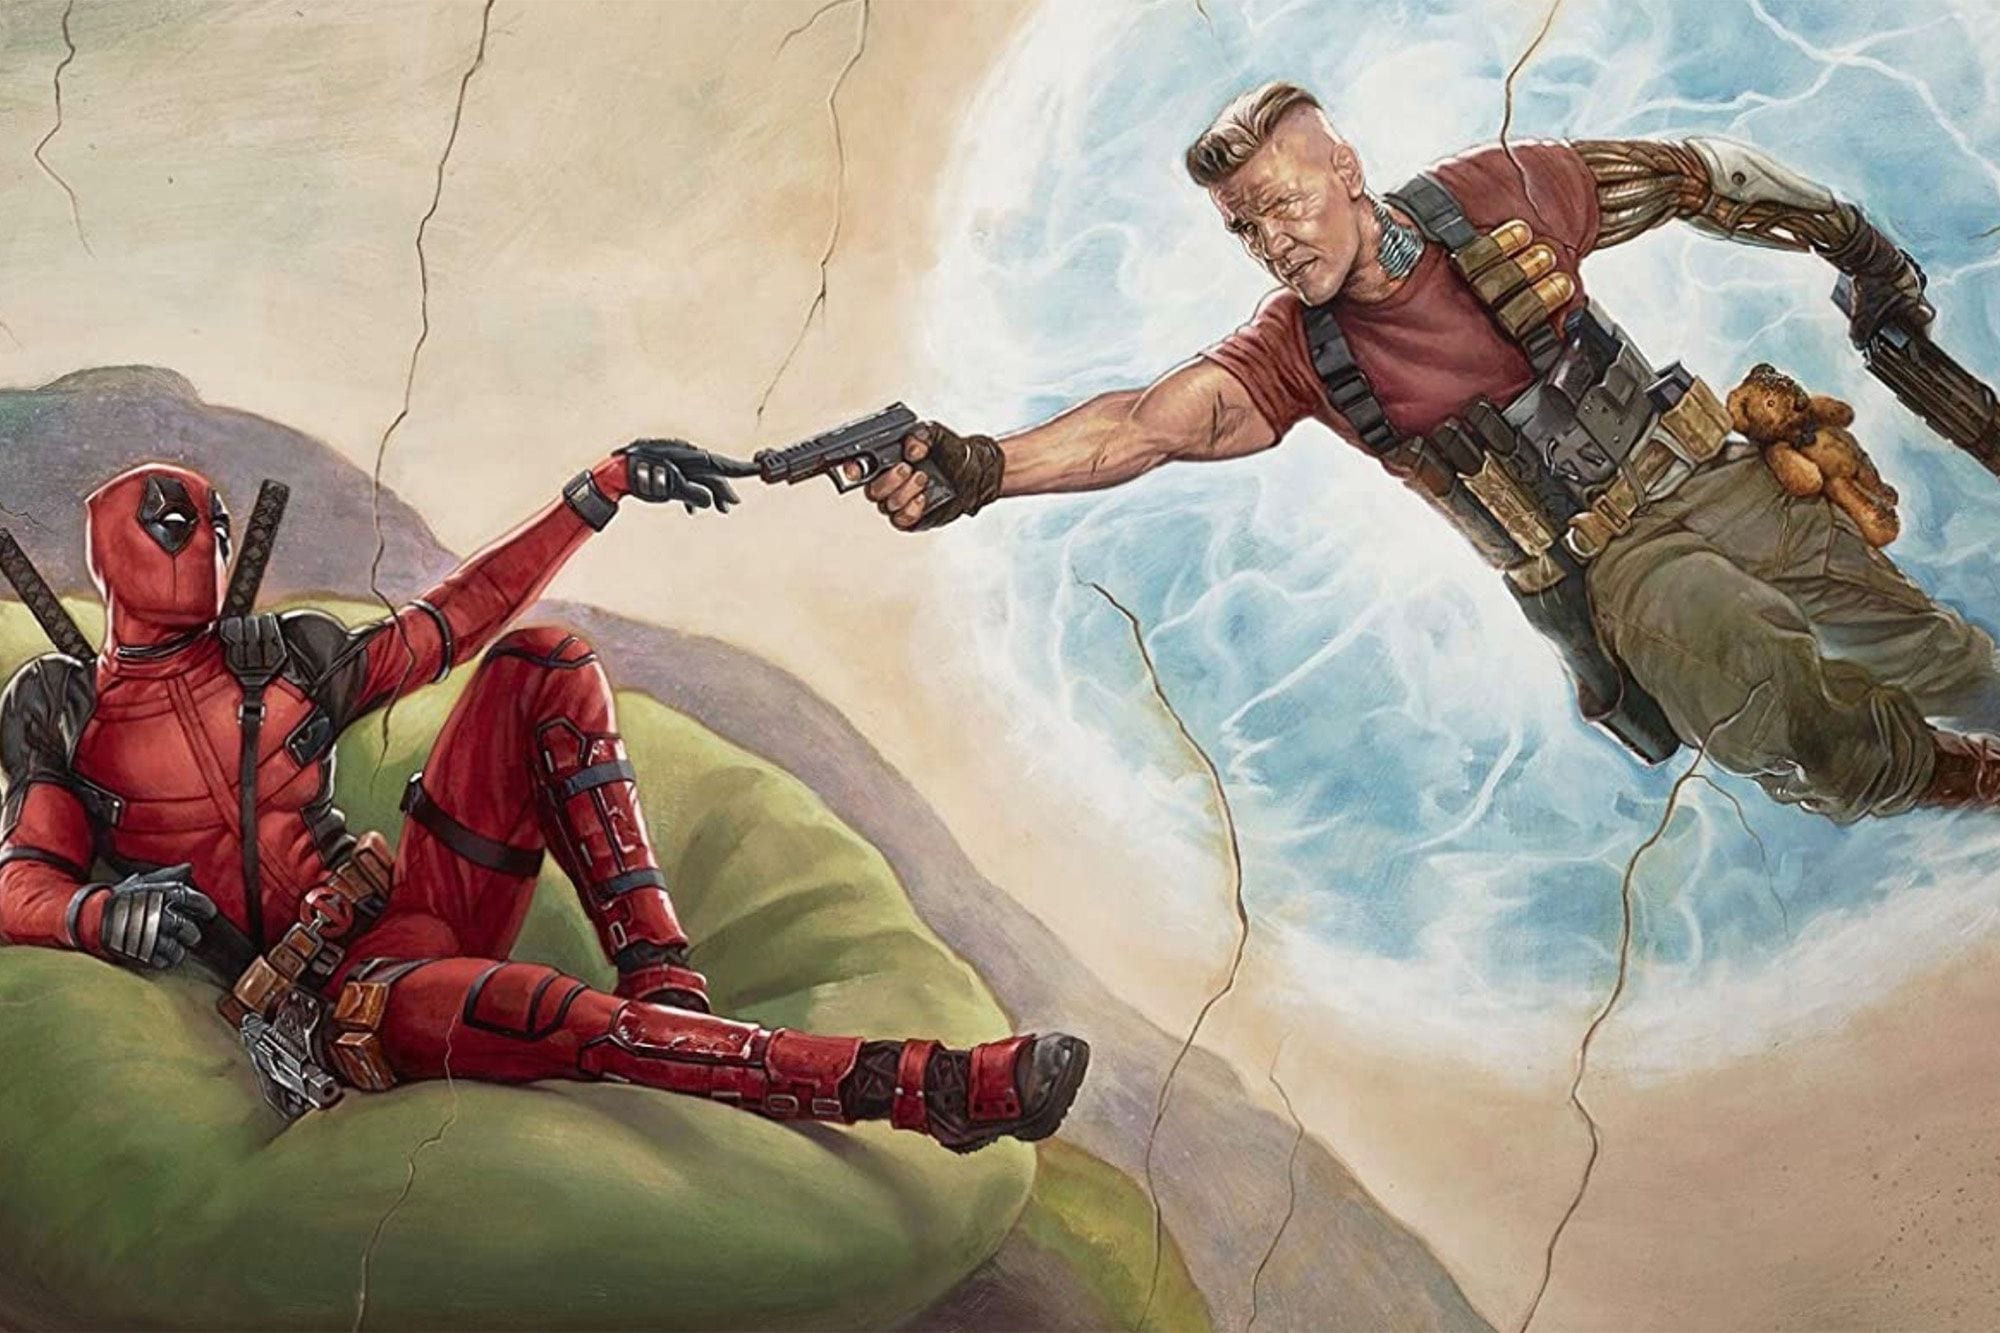 The Highs Are Higher, the Lows Lower in ‘Deadpool 2’